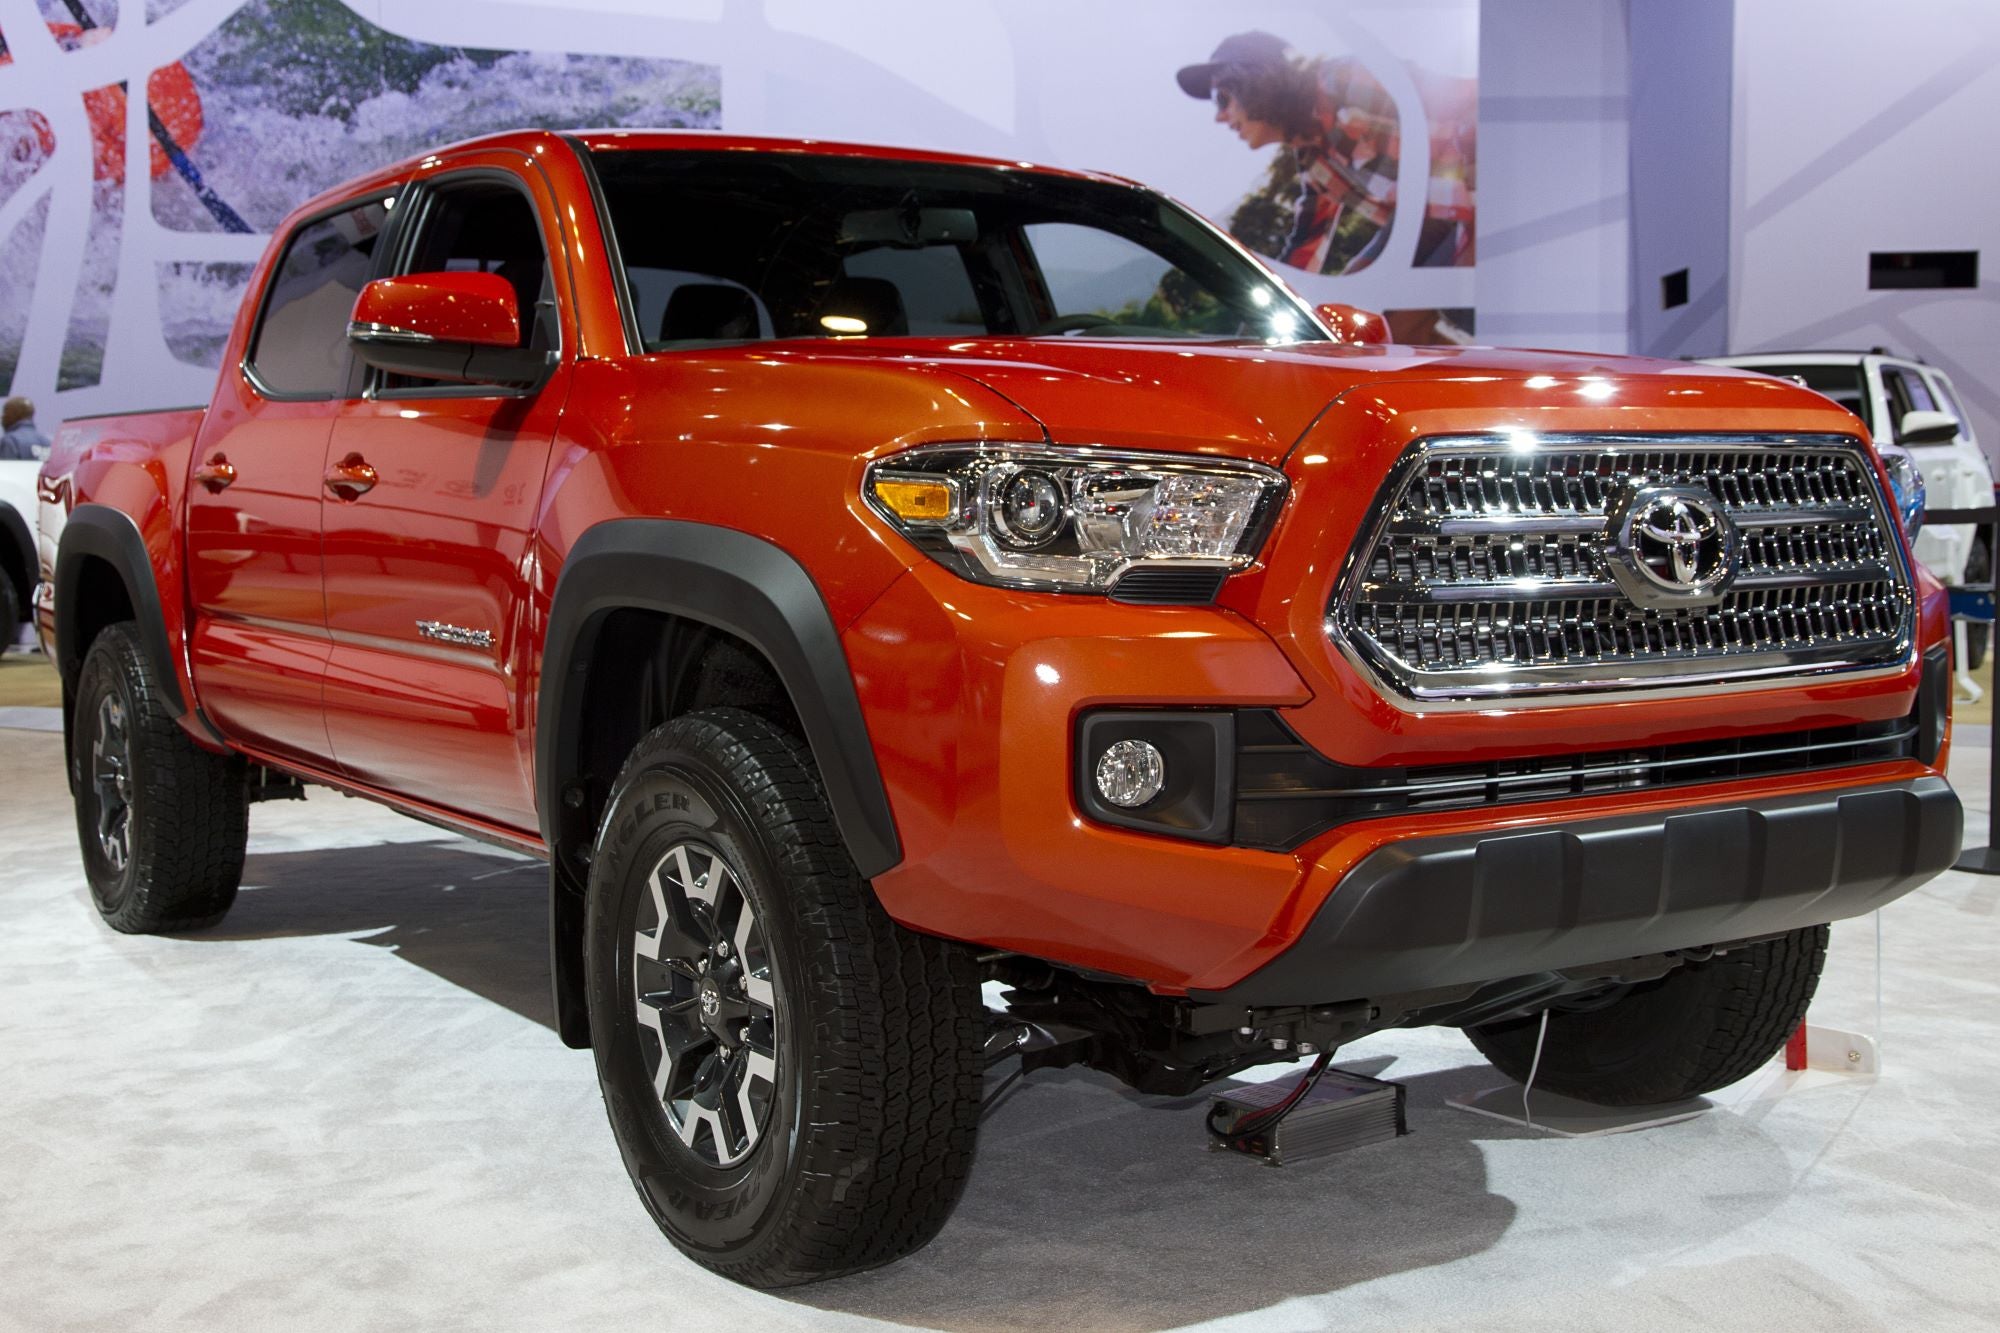 Toyota Introduced the third generation back in 2015. 